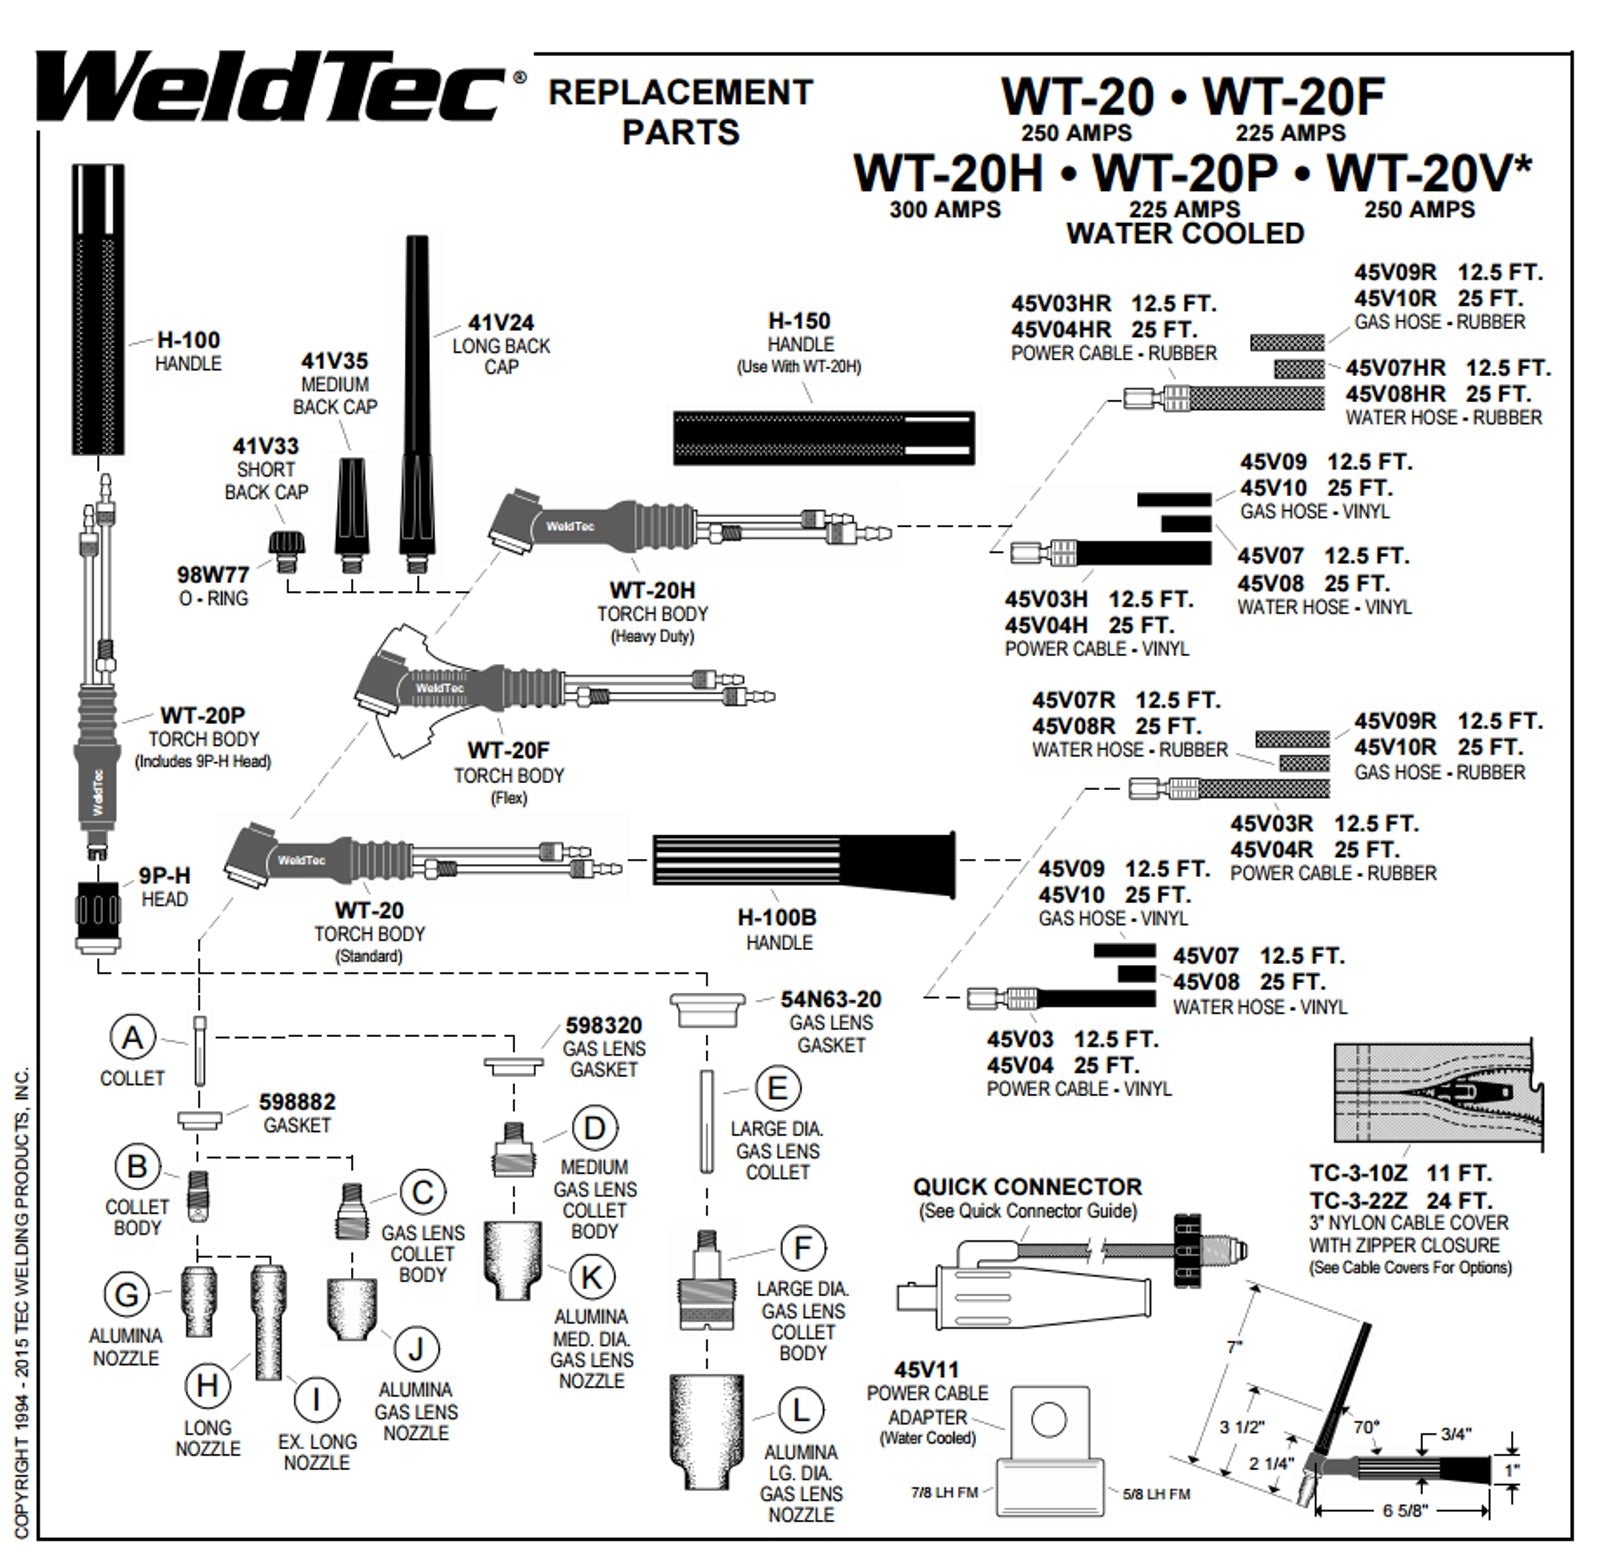 Weldtec 225 Amp Water Cooled TIG Torch 25' (WT-20F-25)